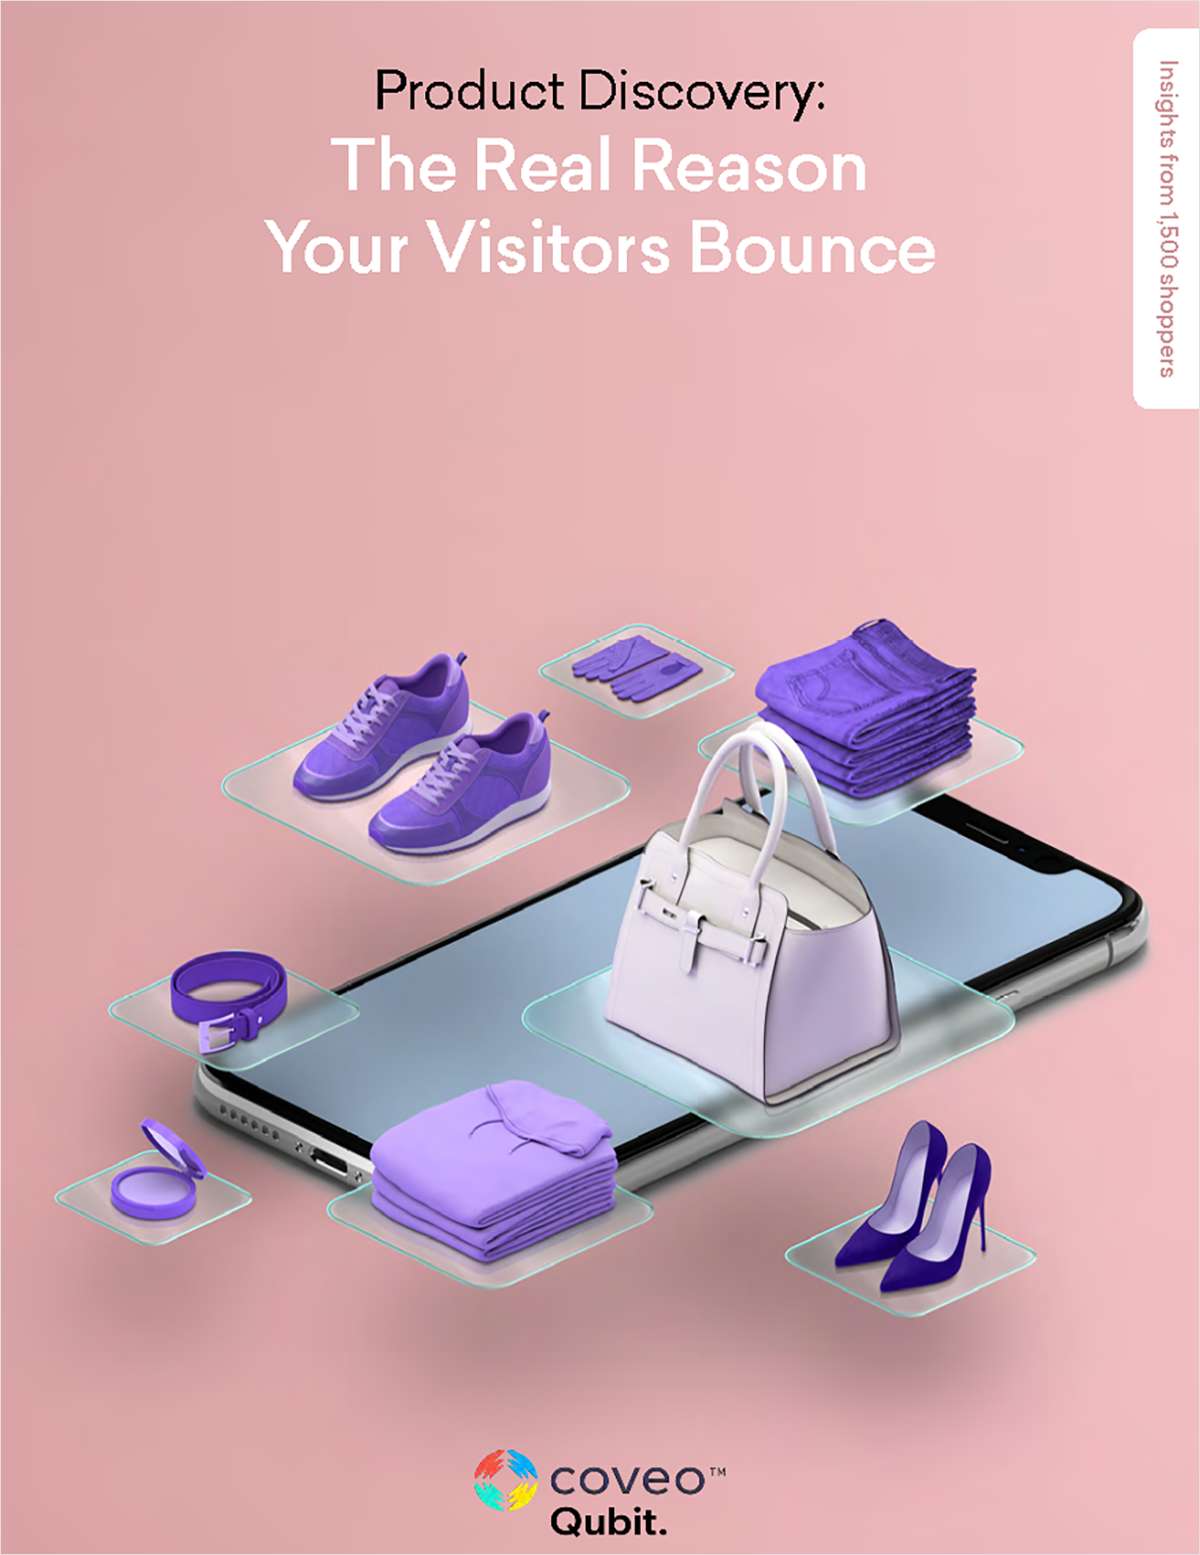 Product Discovery: The Real Reason Your Visitors Bounce